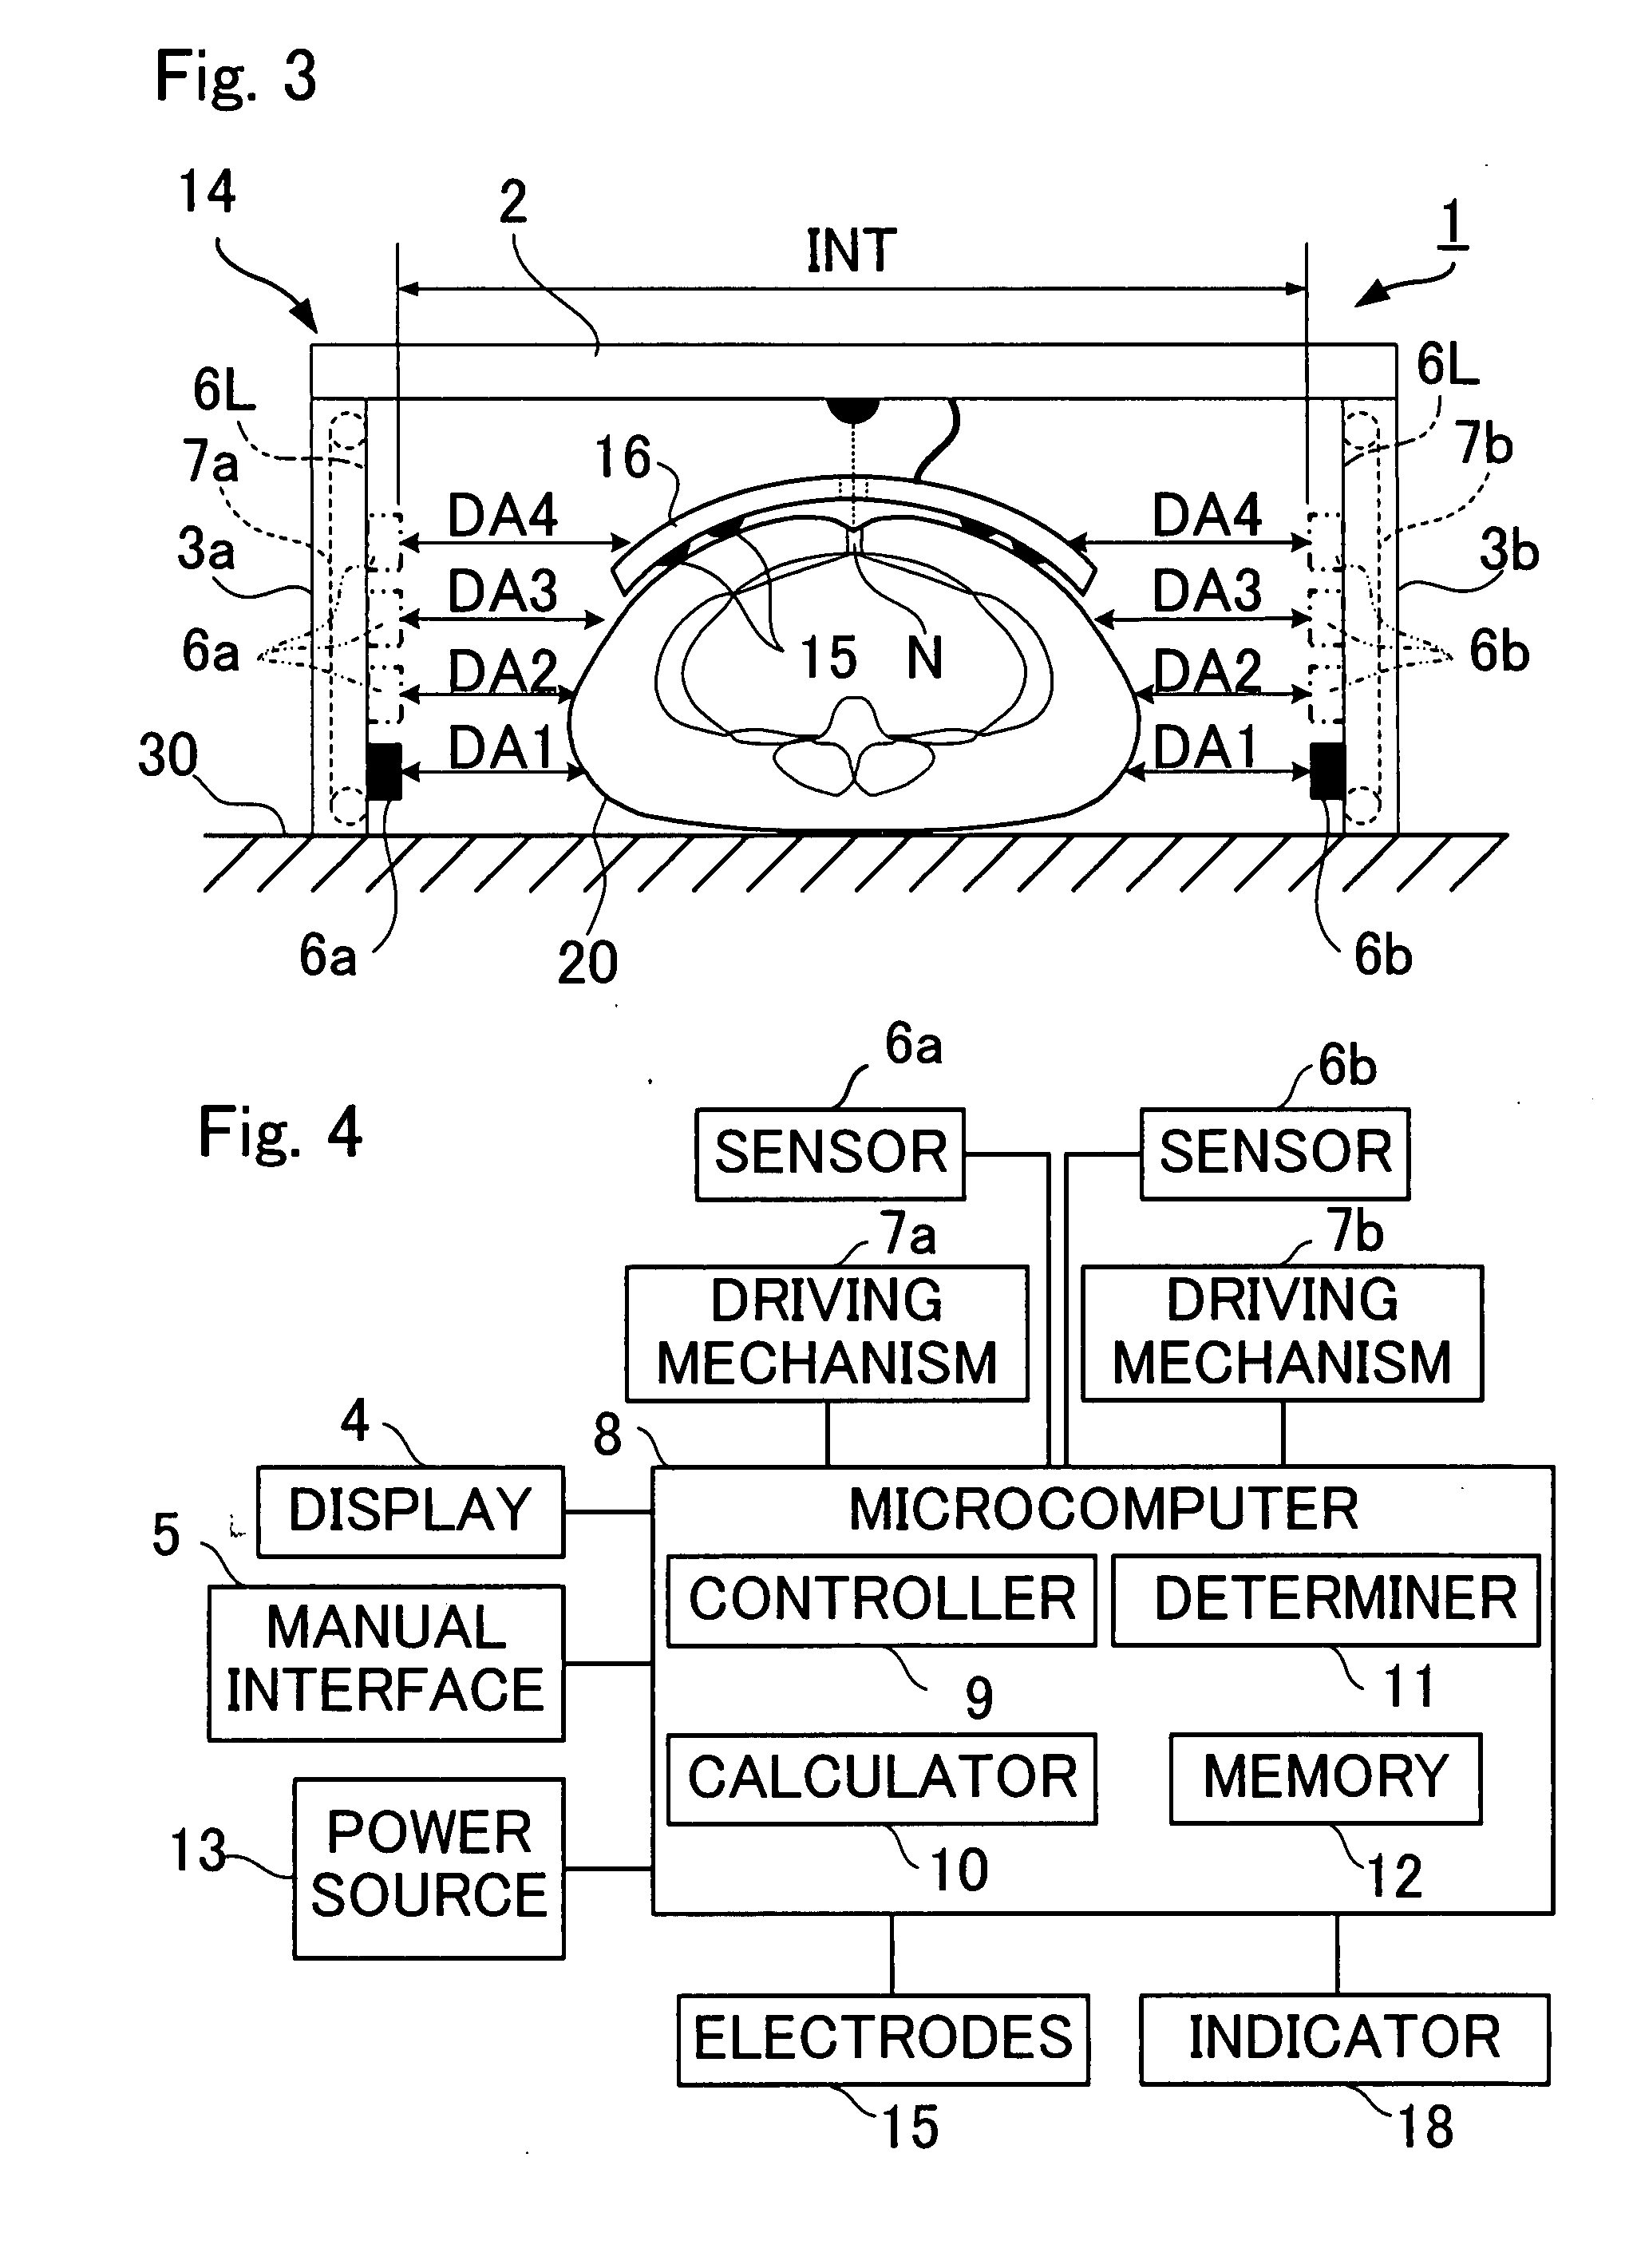 Wait circumference calculation apparatus and body composition determination apparatus